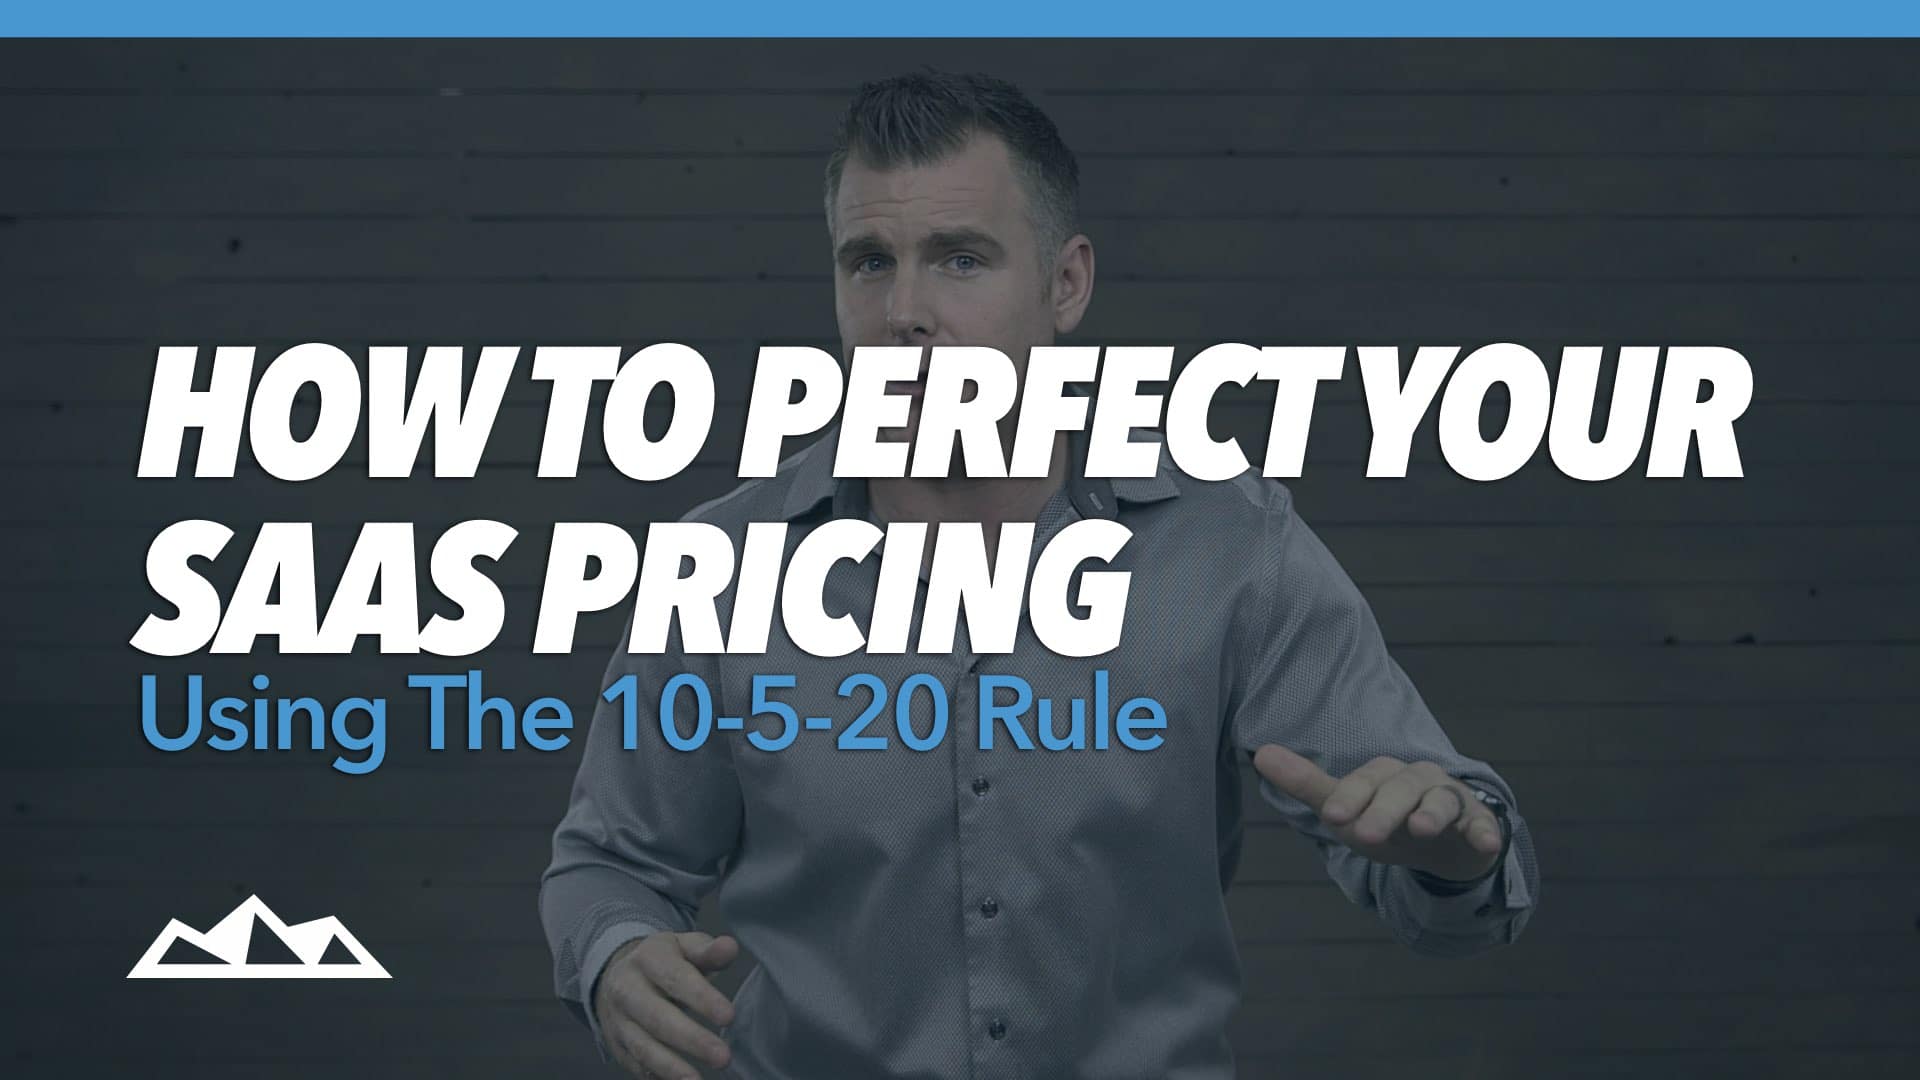 The 10-5-20 Rule To Perfecting Your SaaS Pricing